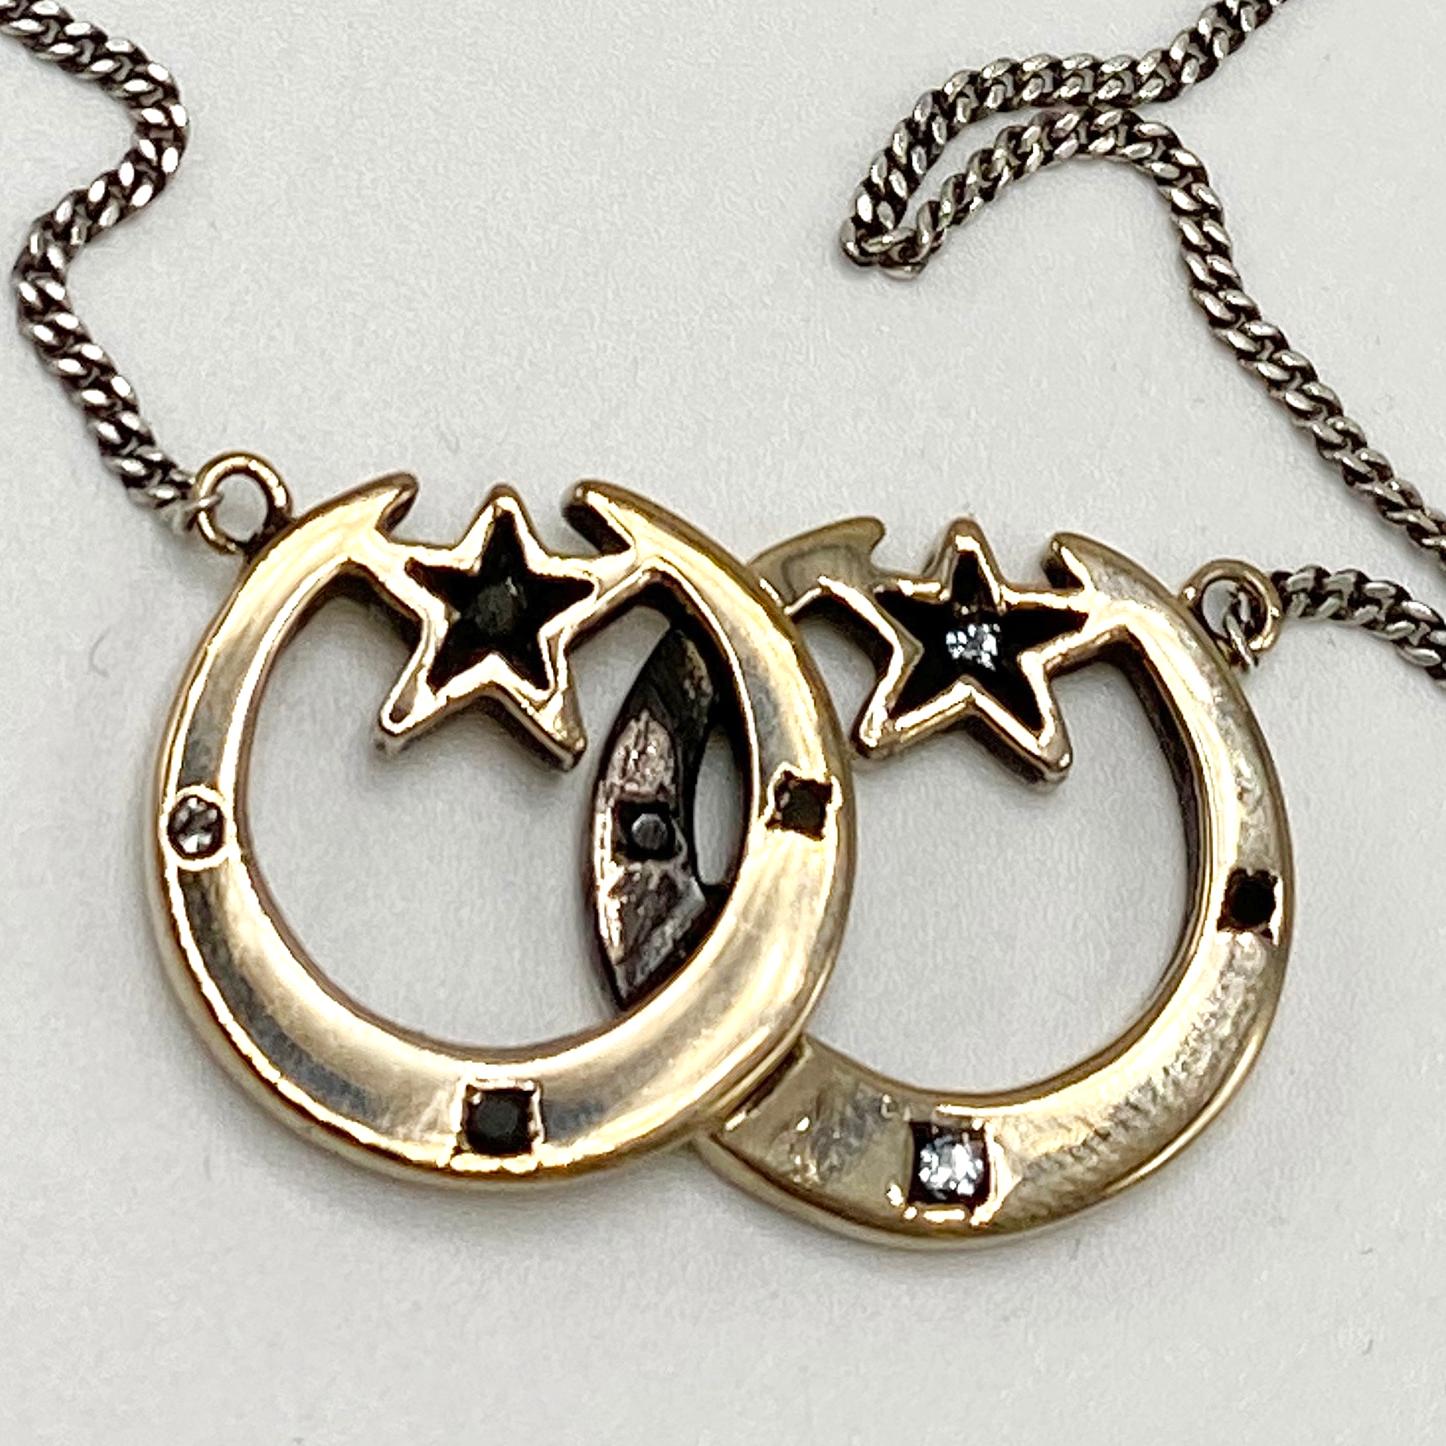 Women's White and Black Diamond Crescent Moon Star Necklace Silver Chain J Dauphin For Sale